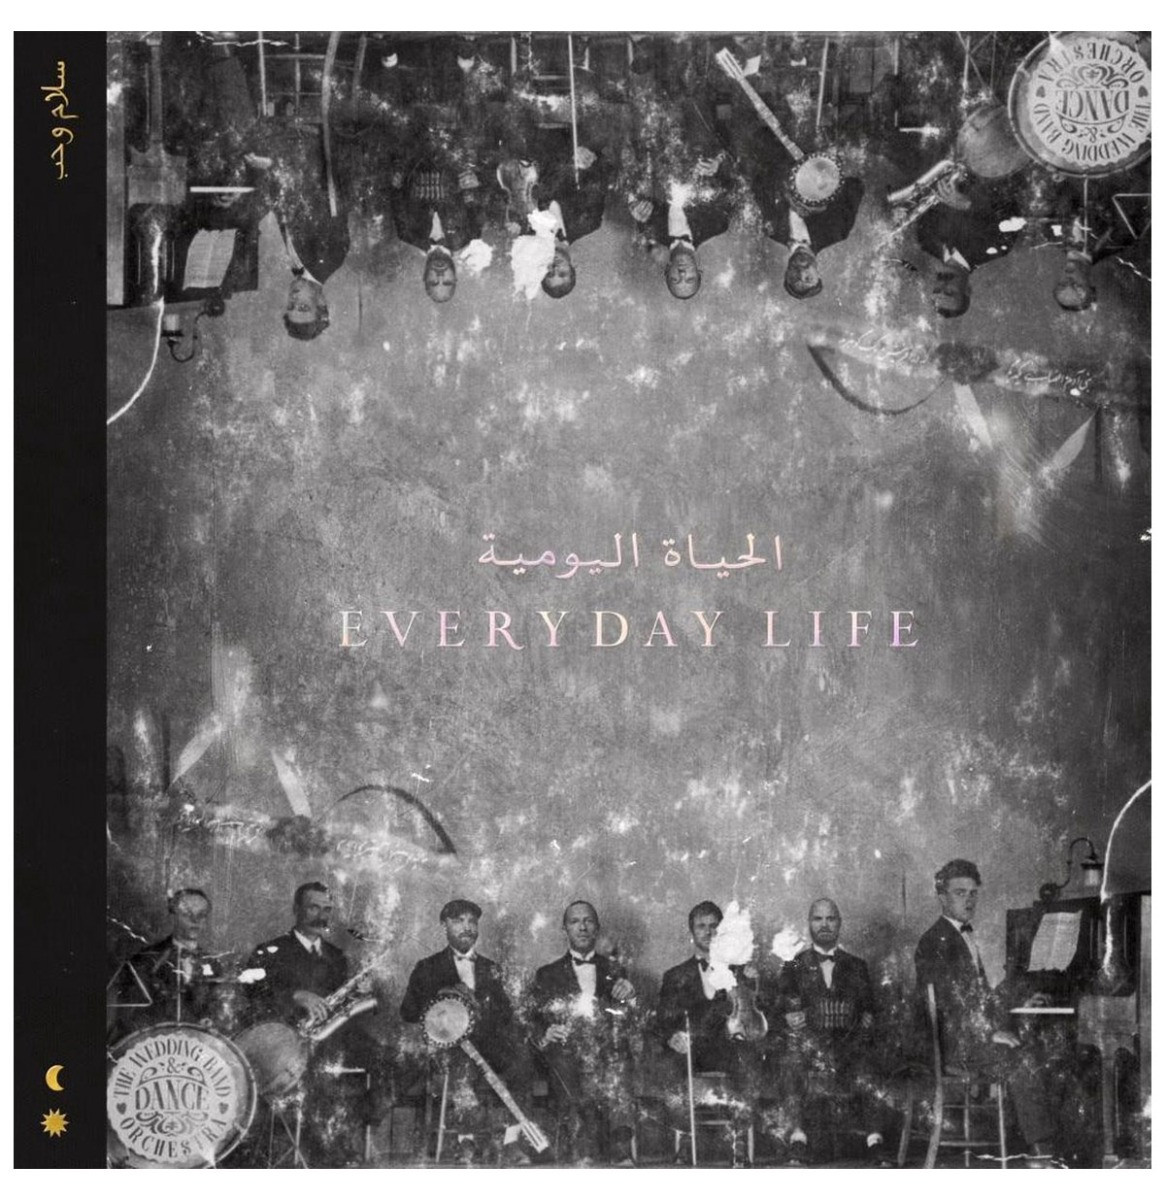 Coldplay - Everyday Life 2-LP